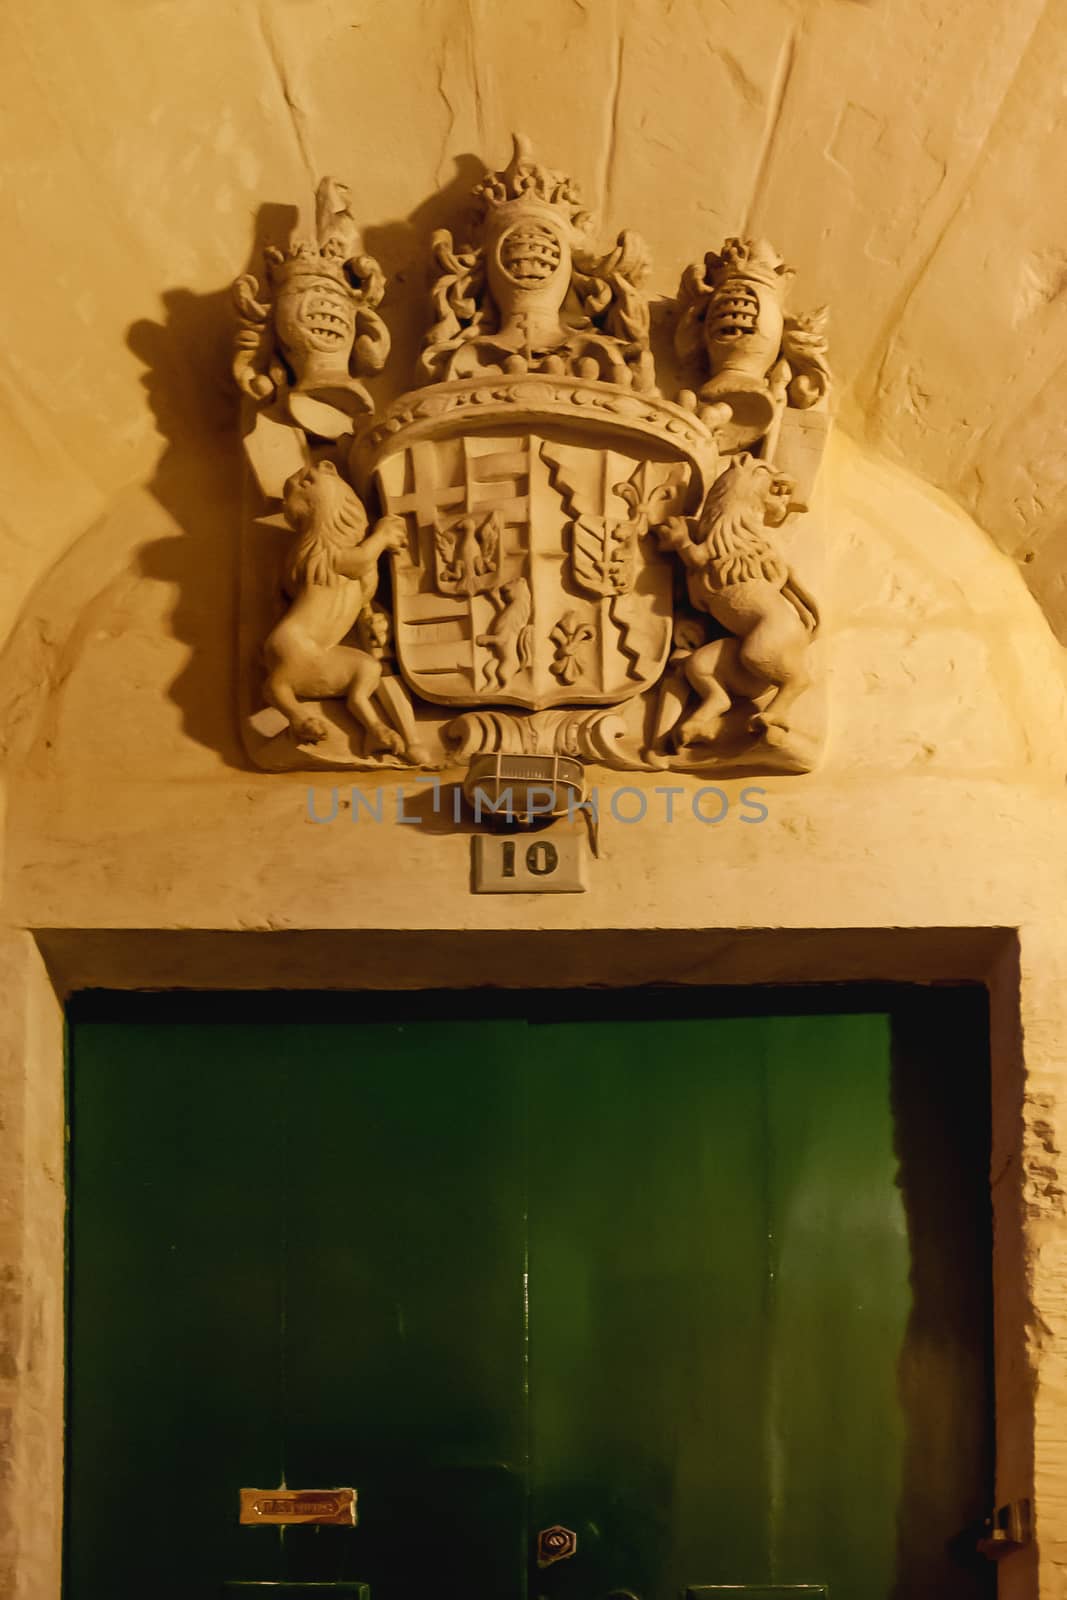 Illuminated coat of arms with heraldic lion. Architectural detail over entrance door. Mdina, ancient capital of Malta.